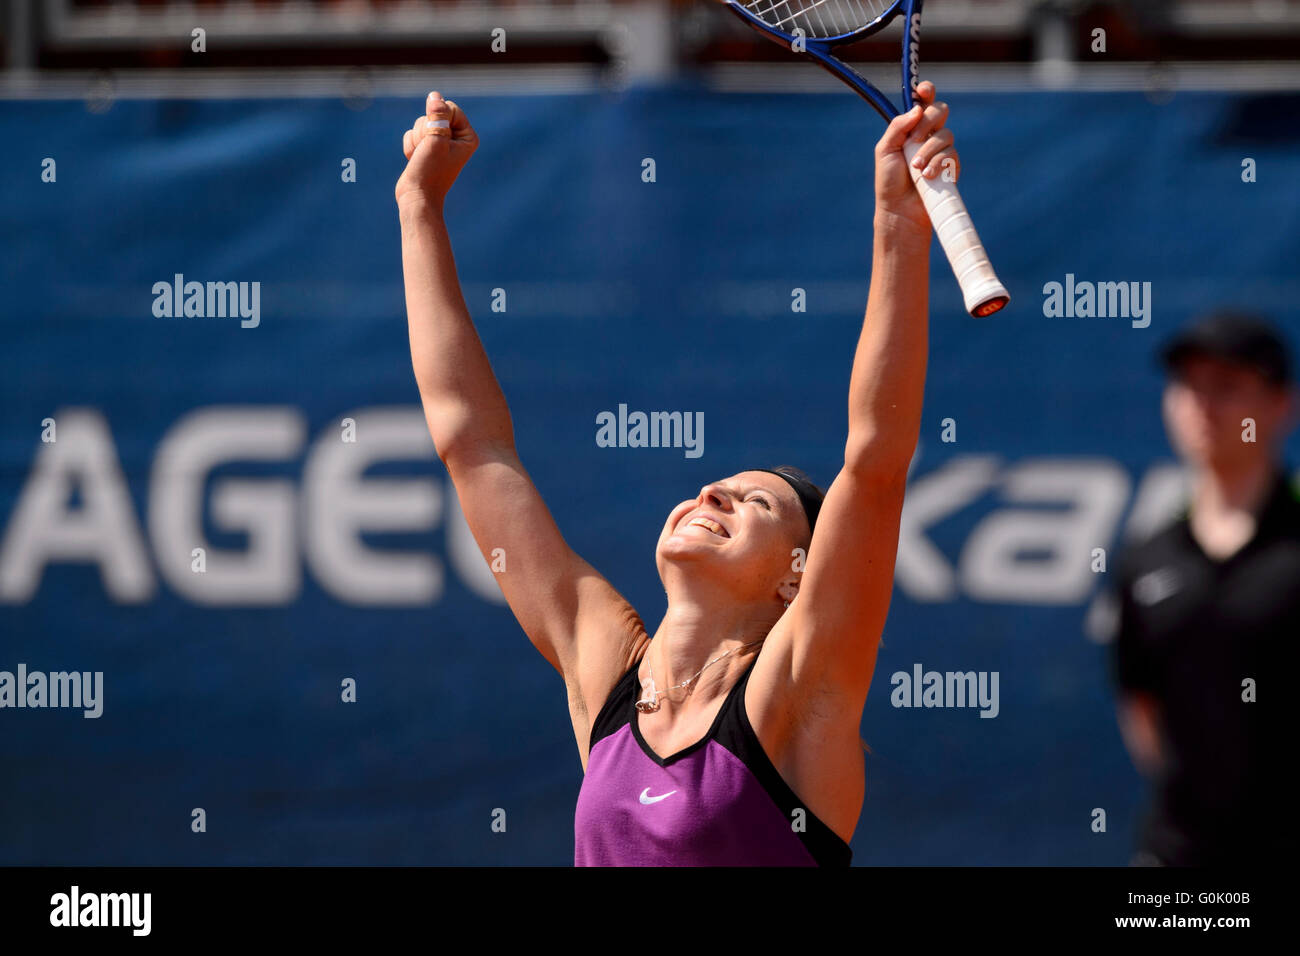 Czech tennis player Lucie Safarova (16th in WTA rankings) defeated Samantha Stosur (25th) in the final of the Prague Open women's tennis tournament, achieving her seventh WTA singles title in Prague, Czech Republic, April 30, 2016. (CTK Photo/Michal Kamaryt) Stock Photo